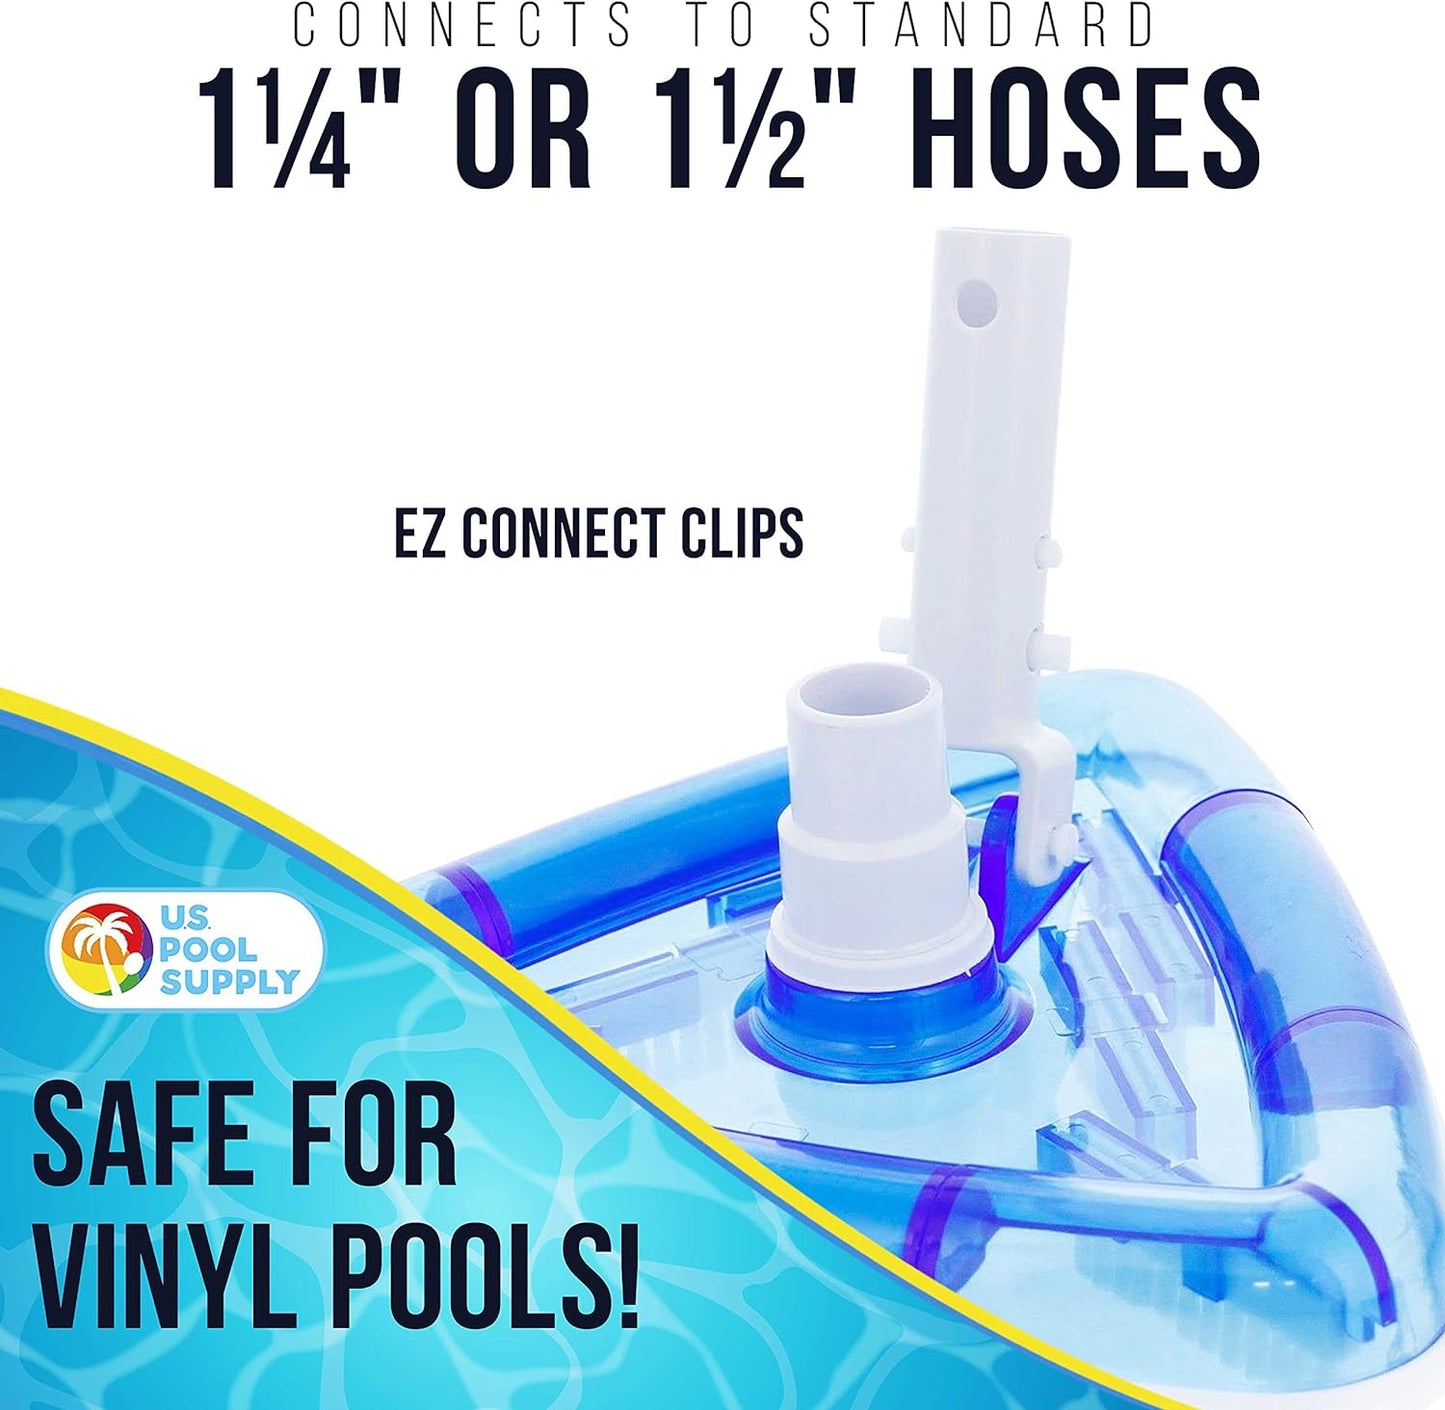 U.S. Pool Supply Weighted Transparent Triangular Pool Vacuum Head with Swivel Hose Connection and EZ Clip Handle